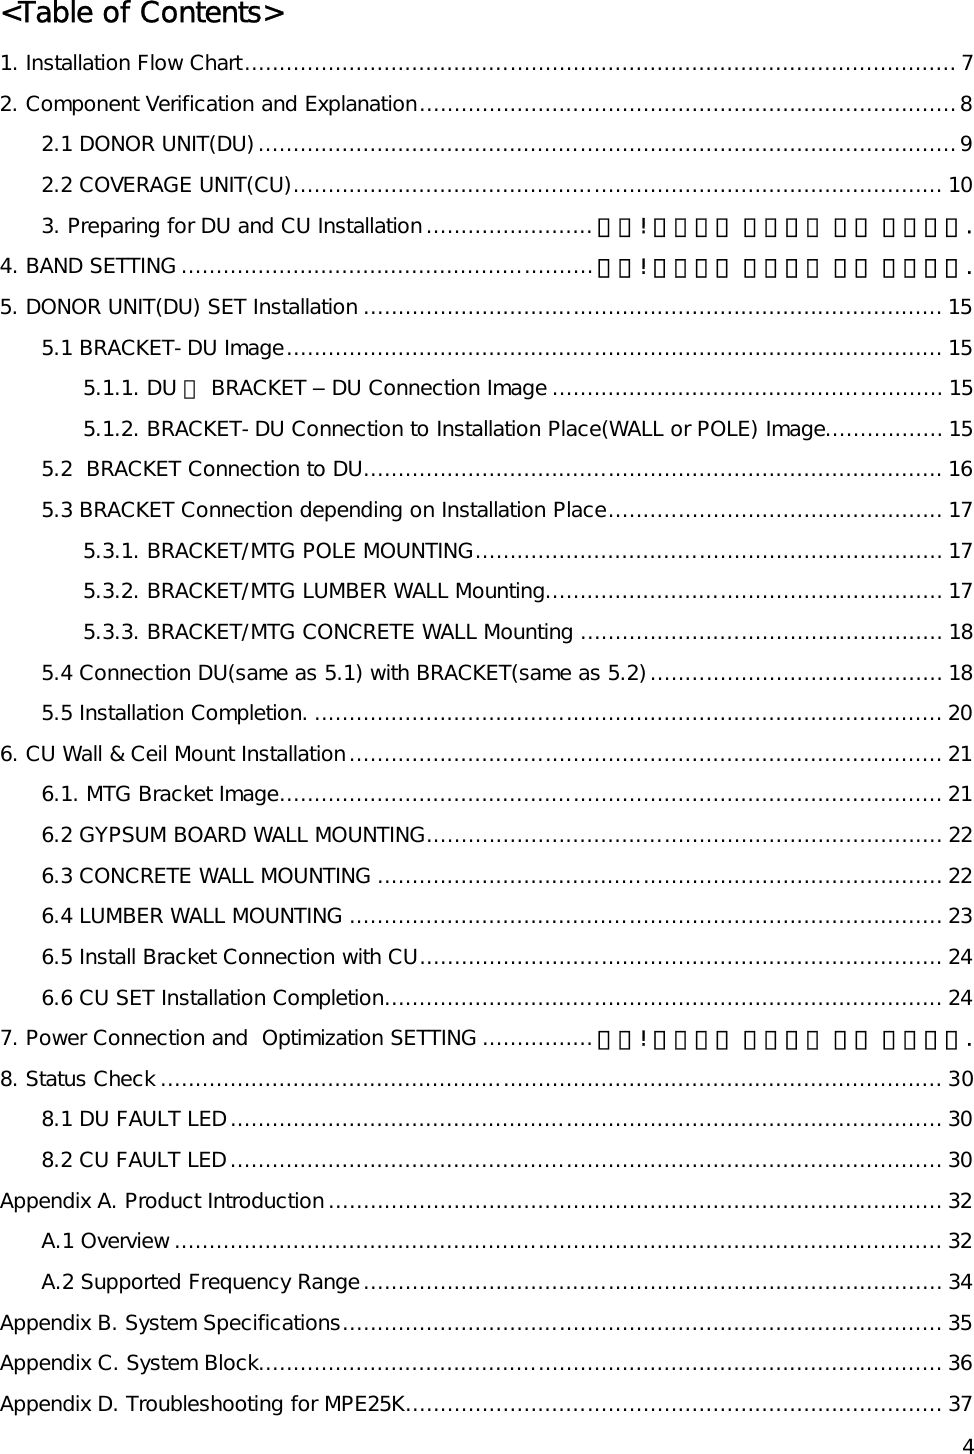    4&lt;Table of Contents&gt; 1. Installation Flow Chart...................................................................................................... 7 2. Component Verification and Explanation.............................................................................8 2.1 DONOR UNIT(DU)....................................................................................................9 2.2 COVERAGE UNIT(CU)............................................................................................. 10 3. Preparing for DU and CU Installation........................ 오류! 책갈피가 정의되어 있지 않습니다. 4. BAND SETTING ...........................................................오류! 책갈피가 정의되어 있지 않습니다. 5. DONOR UNIT(DU) SET Installation ................................................................................... 15 5.1 BRACKET-DU Image.............................................................................................. 15 5.1.1. DU 에 BRACKET – DU Connection Image ........................................................ 15 5.1.2. BRACKET-DU Connection to Installation Place(WALL or POLE) Image................. 15 5.2  BRACKET Connection to DU................................................................................... 16 5.3 BRACKET Connection depending on Installation Place................................................ 17 5.3.1. BRACKET/MTG POLE MOUNTING................................................................... 17 5.3.2. BRACKET/MTG LUMBER WALL Mounting......................................................... 17 5.3.3. BRACKET/MTG CONCRETE WALL Mounting .................................................... 18 5.4 Connection DU(same as 5.1) with BRACKET(same as 5.2).......................................... 18 5.5 Installation Completion. .......................................................................................... 20 6. CU Wall &amp; Ceil Mount Installation..................................................................................... 21 6.1. MTG Bracket Image............................................................................................... 21 6.2 GYPSUM BOARD WALL MOUNTING.......................................................................... 22 6.3 CONCRETE WALL MOUNTING ................................................................................. 22 6.4 LUMBER WALL MOUNTING ..................................................................................... 23 6.5 Install Bracket Connection with CU........................................................................... 24 6.6 CU SET Installation Completion................................................................................ 24 7. Power Connection and  Optimization SETTING ................오류! 책갈피가 정의되어 있지 않습니다. 8. Status Check ................................................................................................................ 30 8.1 DU FAULT LED...................................................................................................... 30 8.2 CU FAULT LED...................................................................................................... 30 Appendix A. Product Introduction........................................................................................ 32 A.1 Overview .............................................................................................................. 32 A.2 Supported Frequency Range................................................................................... 34 Appendix B. System Specifications...................................................................................... 35 Appendix C. System Block.................................................................................................. 36 Appendix D. Troubleshooting for MPE25K............................................................................. 37 